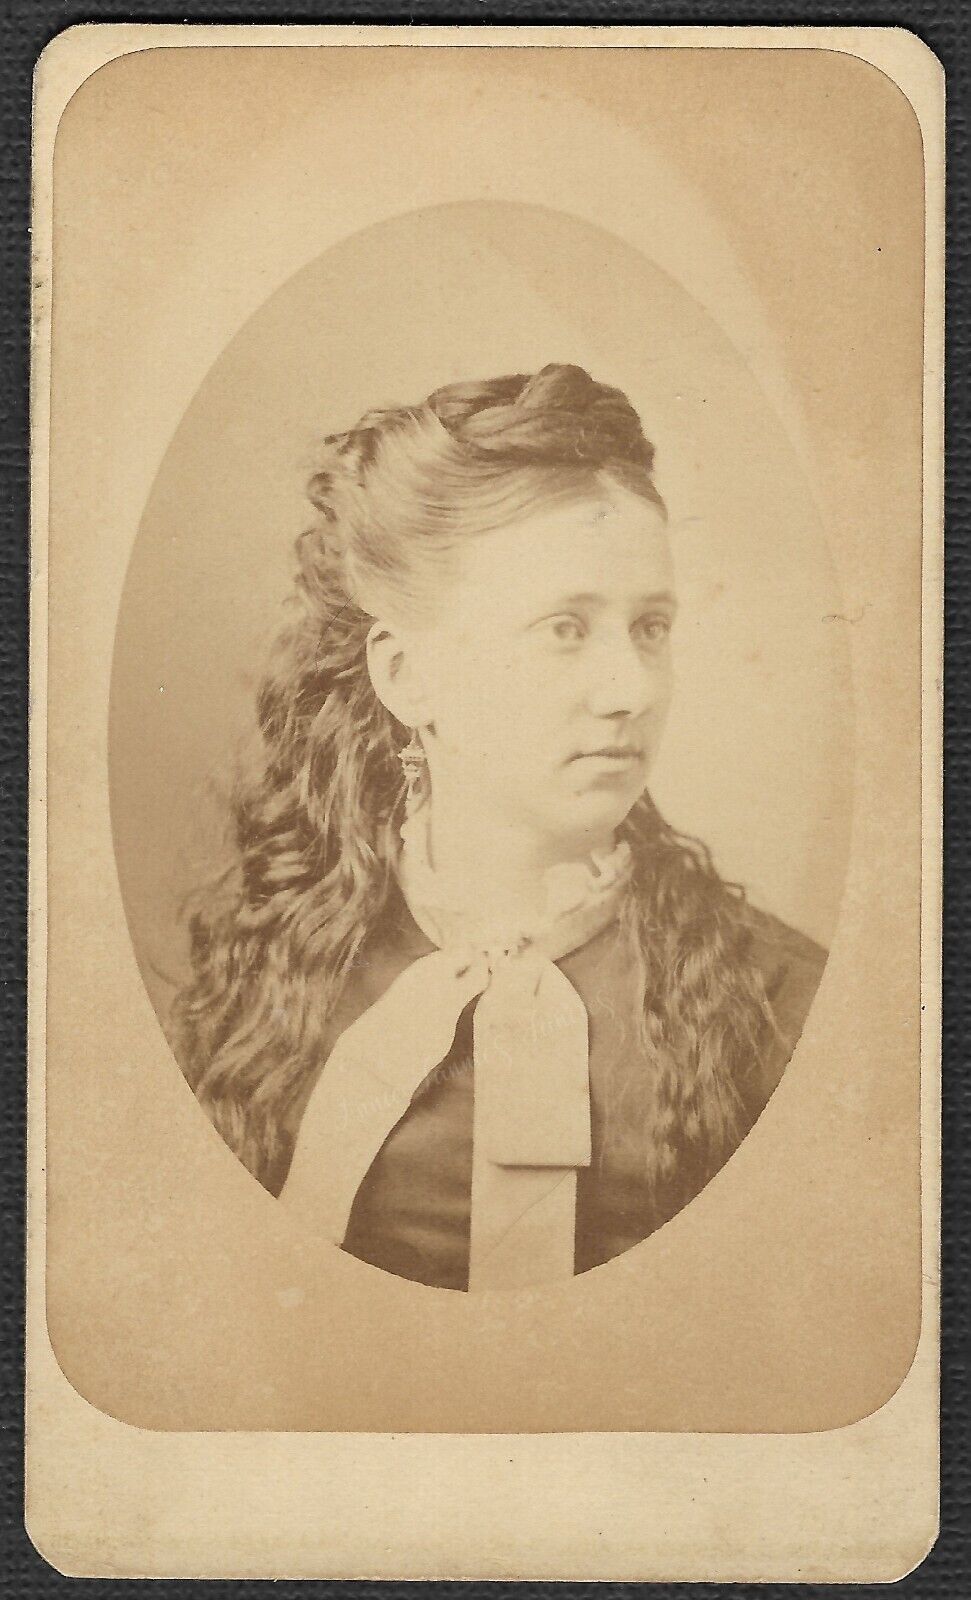 Victorian Lady Beautiful Hair CDV Photo 1870s Willimantic Gallery of Art CT ID'd